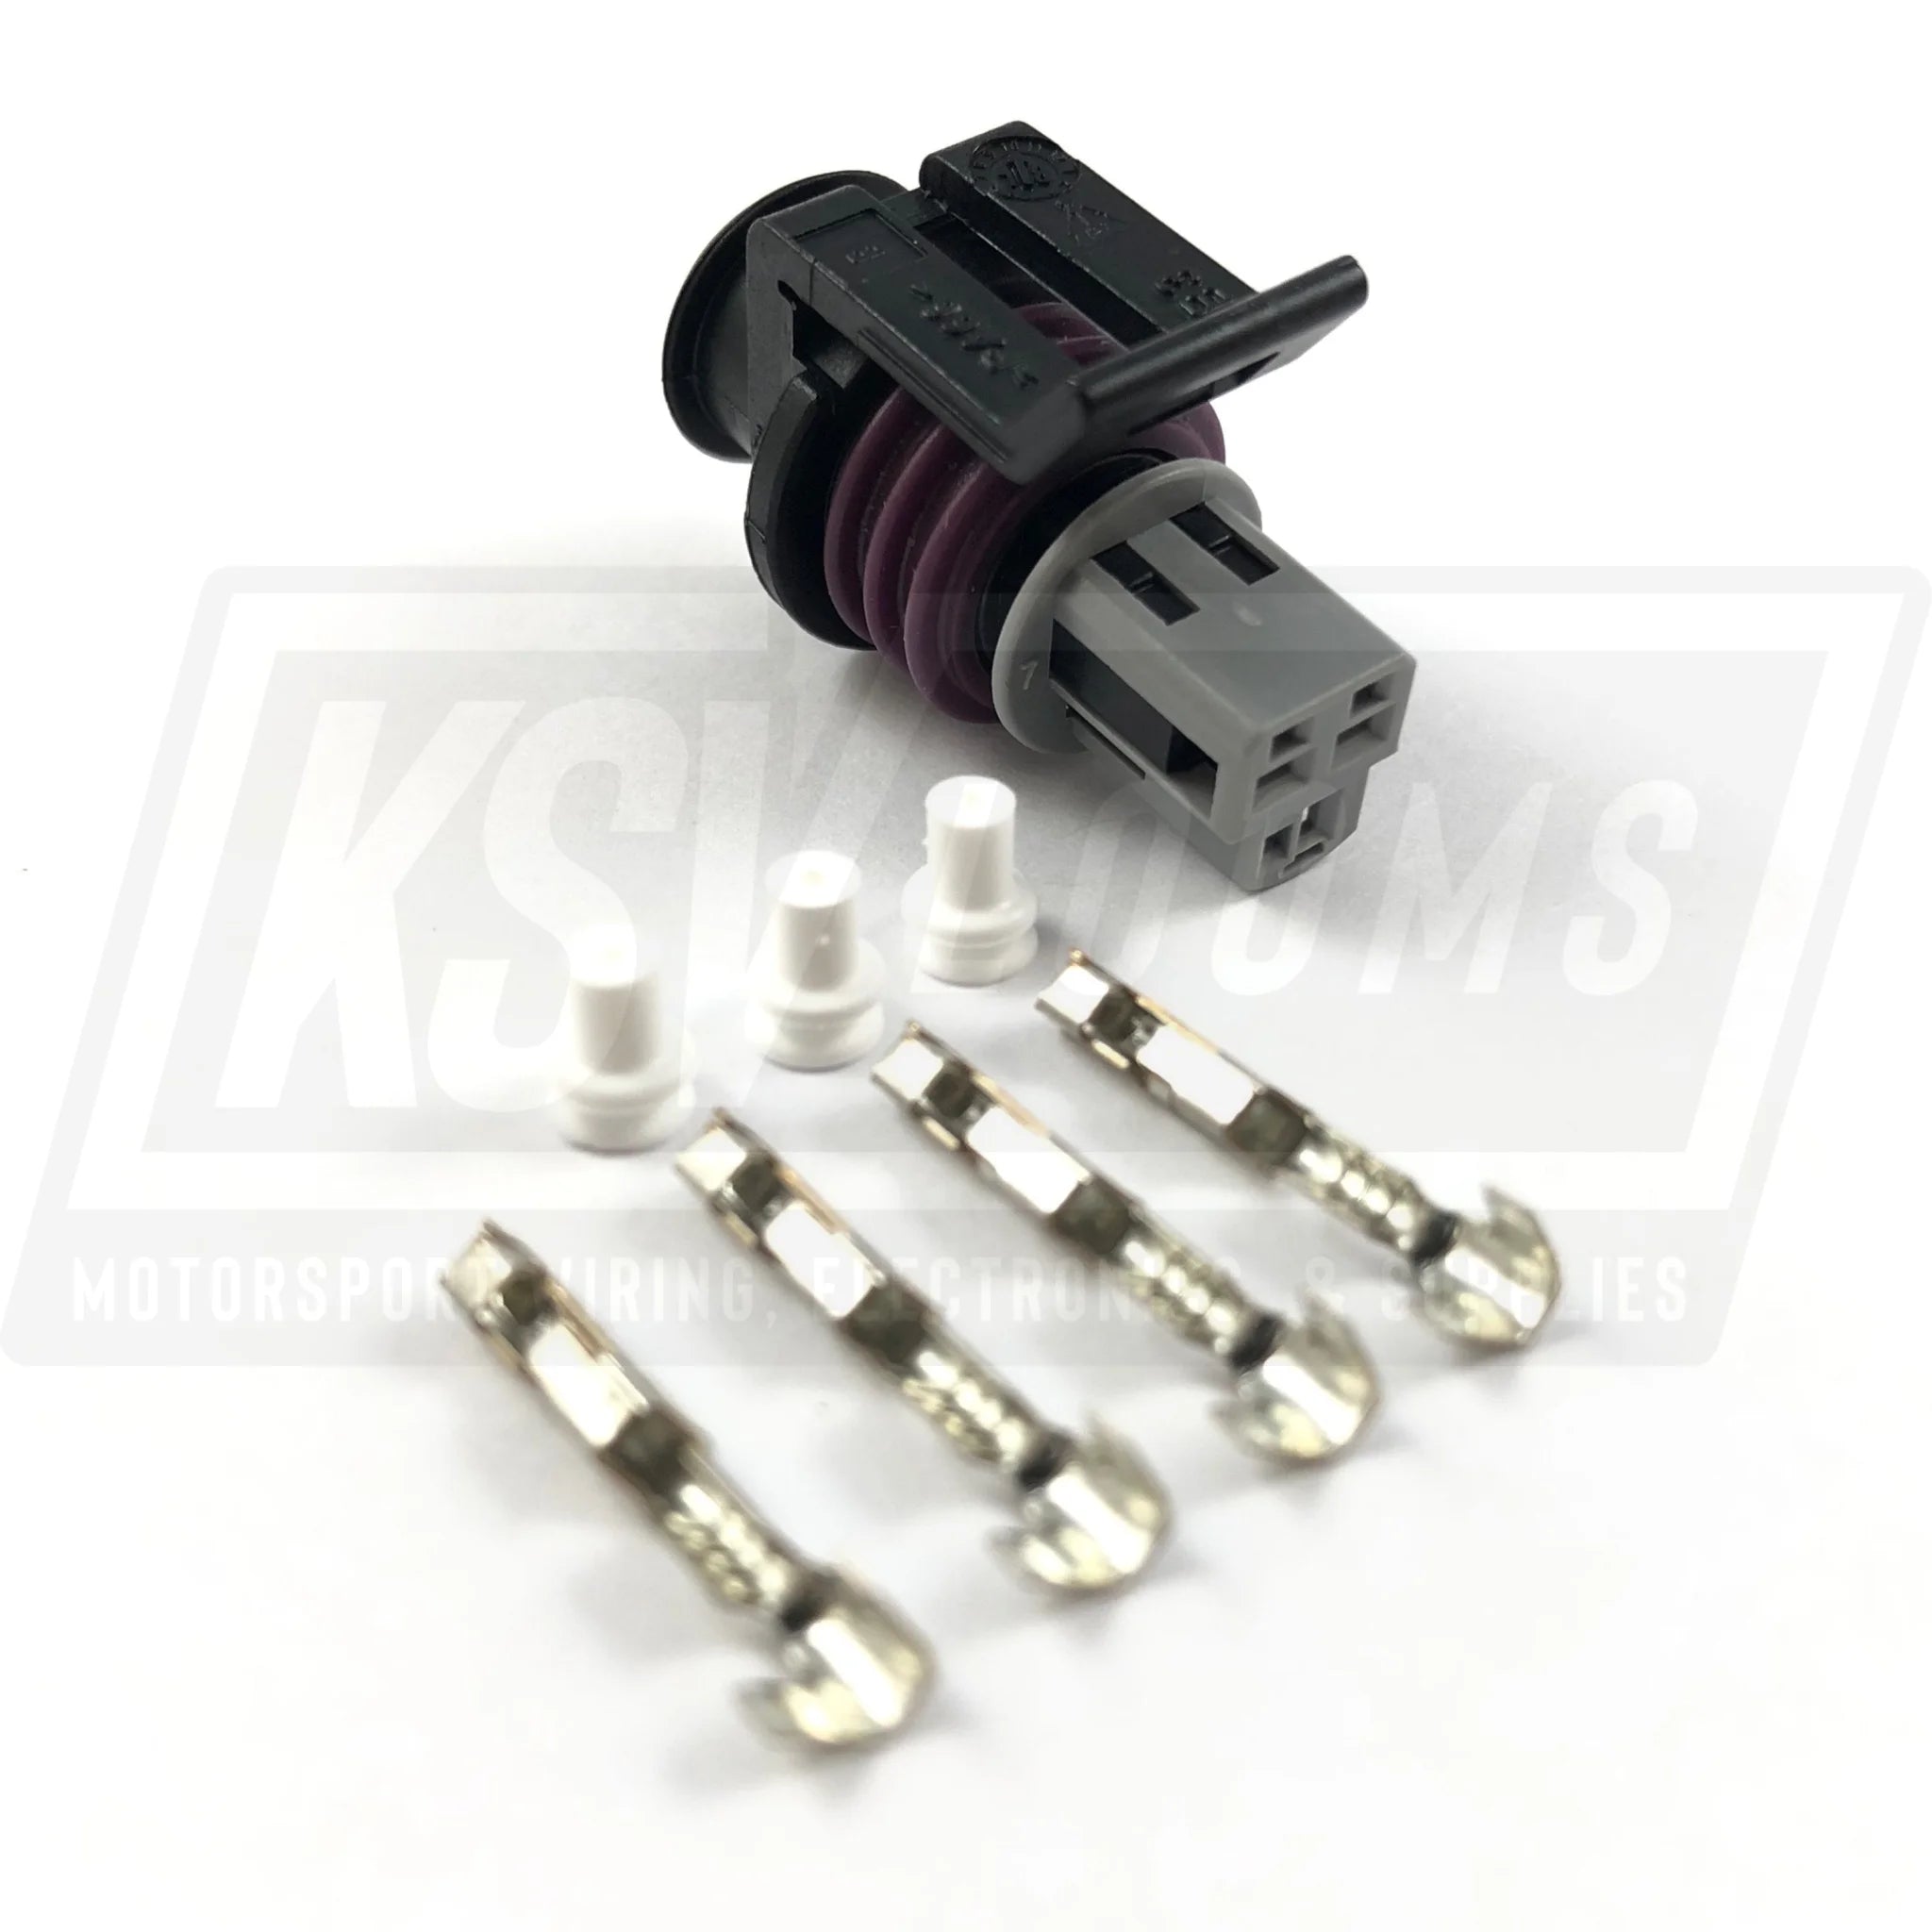 3-Way Connector Kit For Rife 200 Psi Pressure Transducer 1/8’ Npt (52-200Psi)